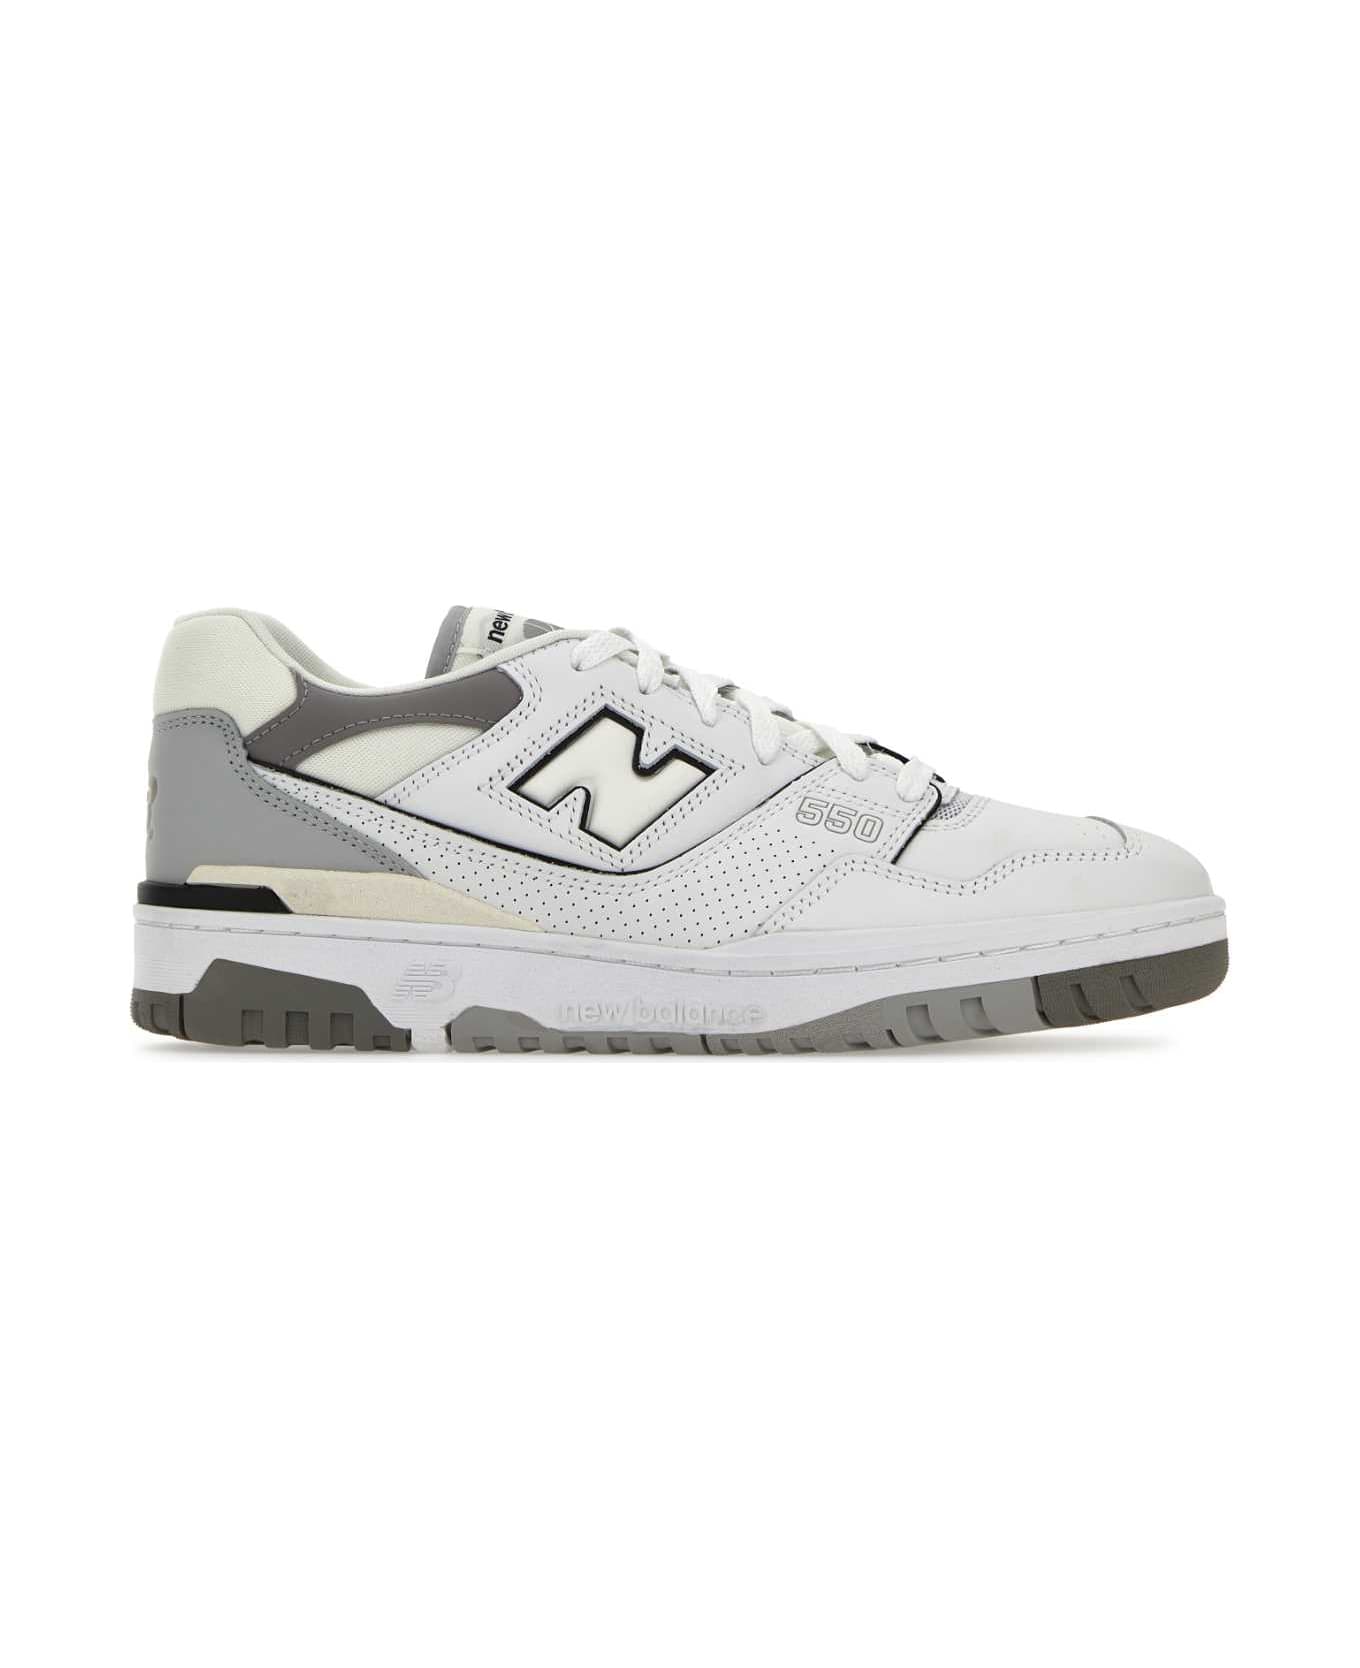 New Balance Two-tone Leather 550 Sneakers - WHITEGREY スニーカー